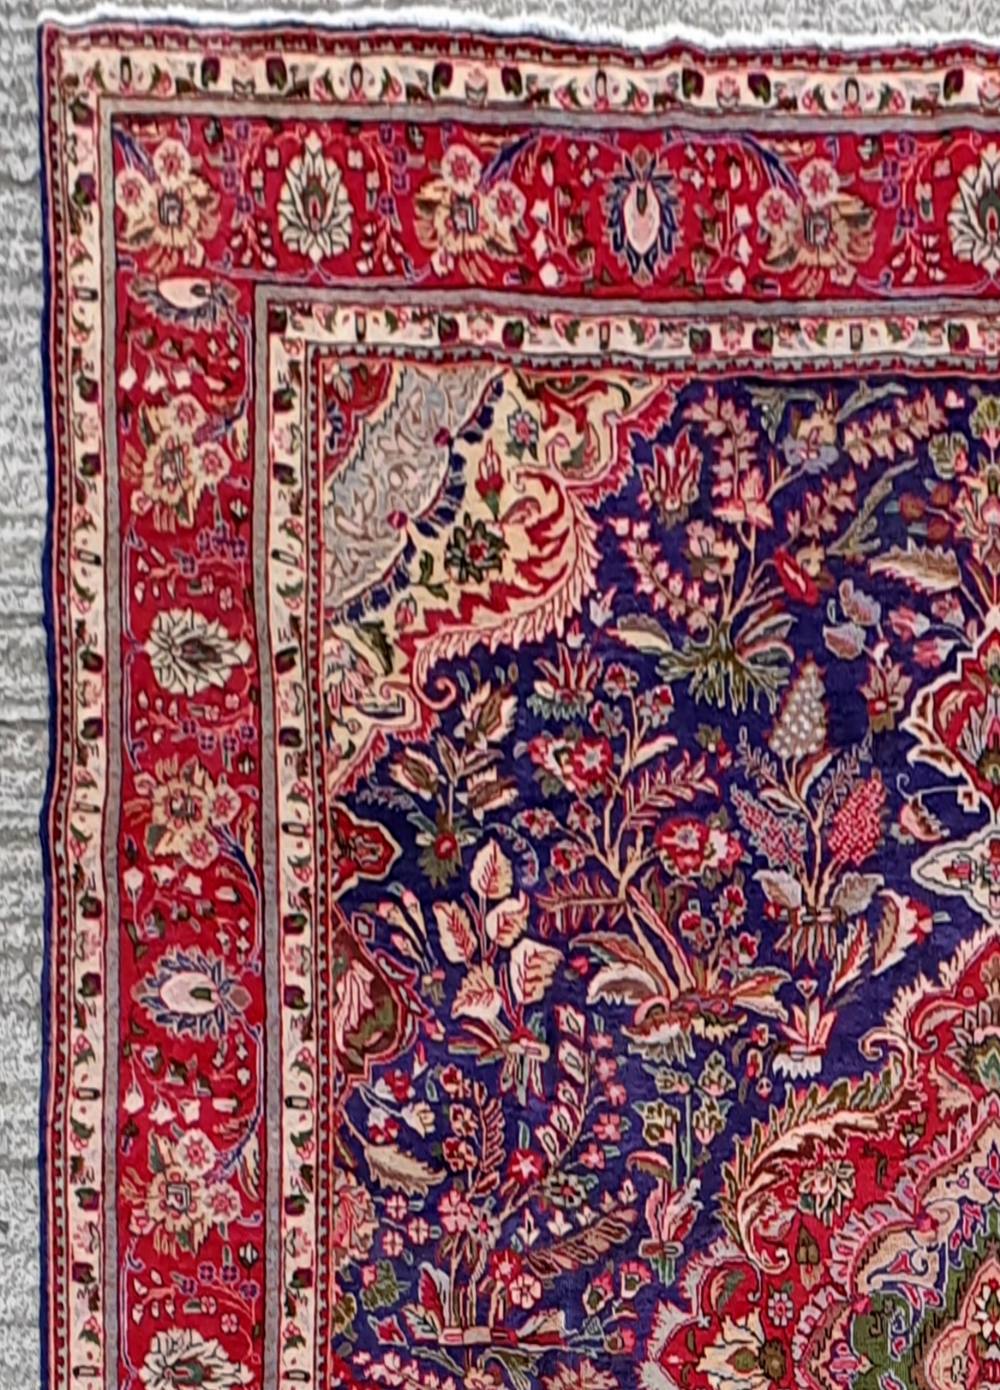 A VERY FINE VINTAGE HAND KNOTTED "TABRIZ" PERSIAN RUG, beautiful colour with floral and foliage - Image 2 of 2